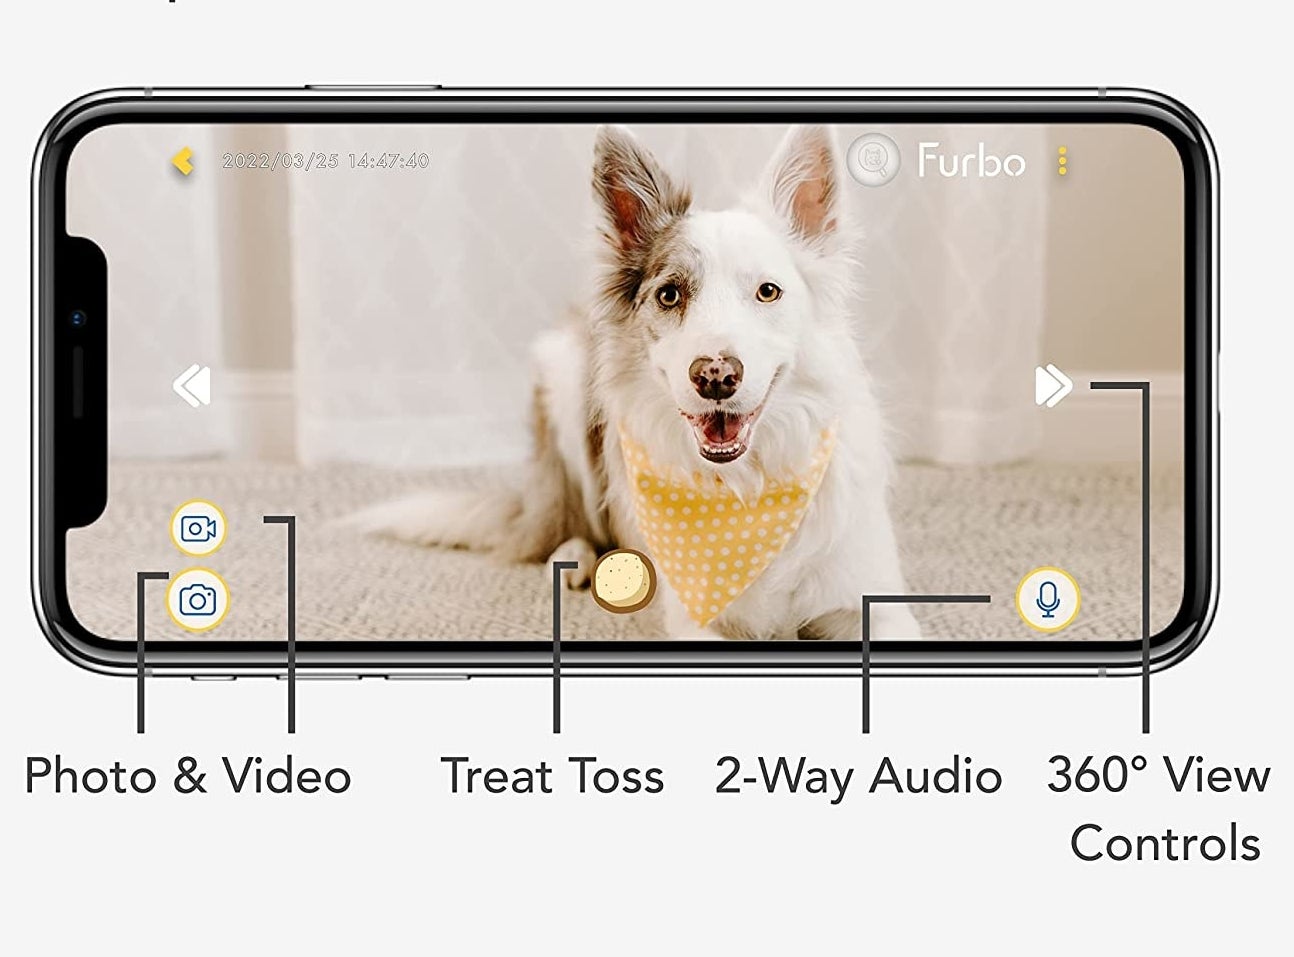 a phone open to the furbo app showing all of the controls